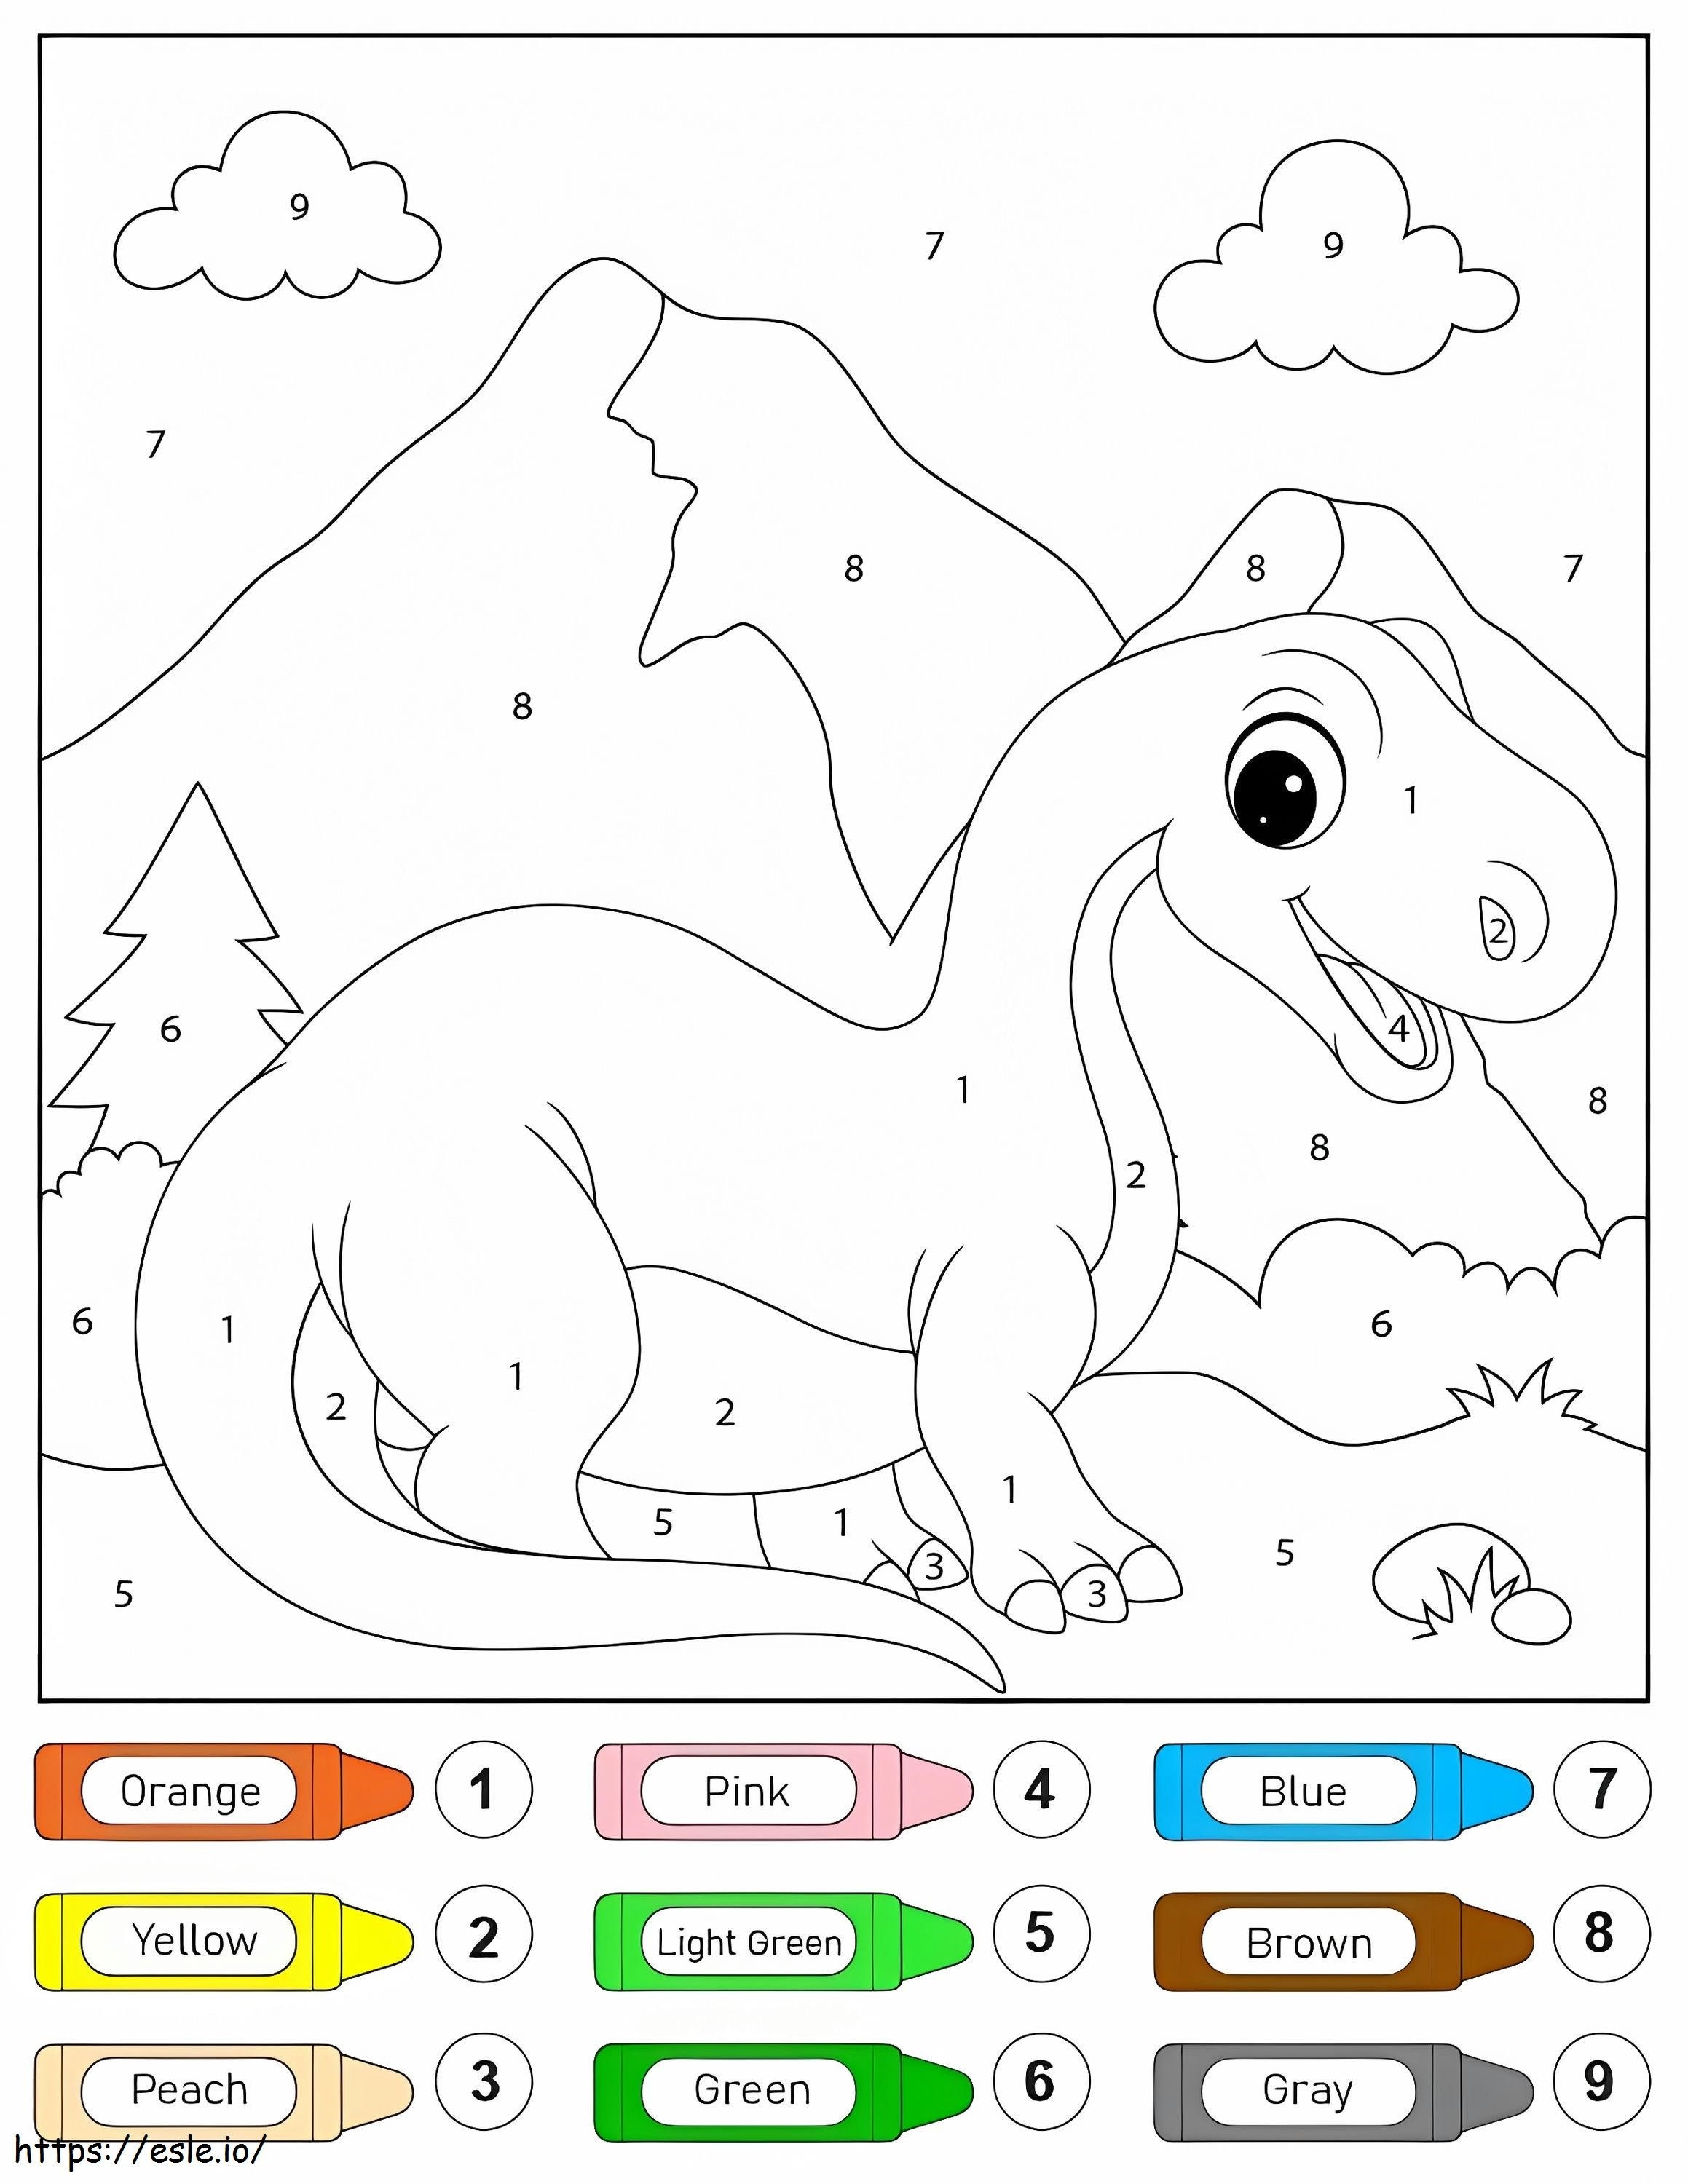 The Long Neck Dino Color By Number coloring page